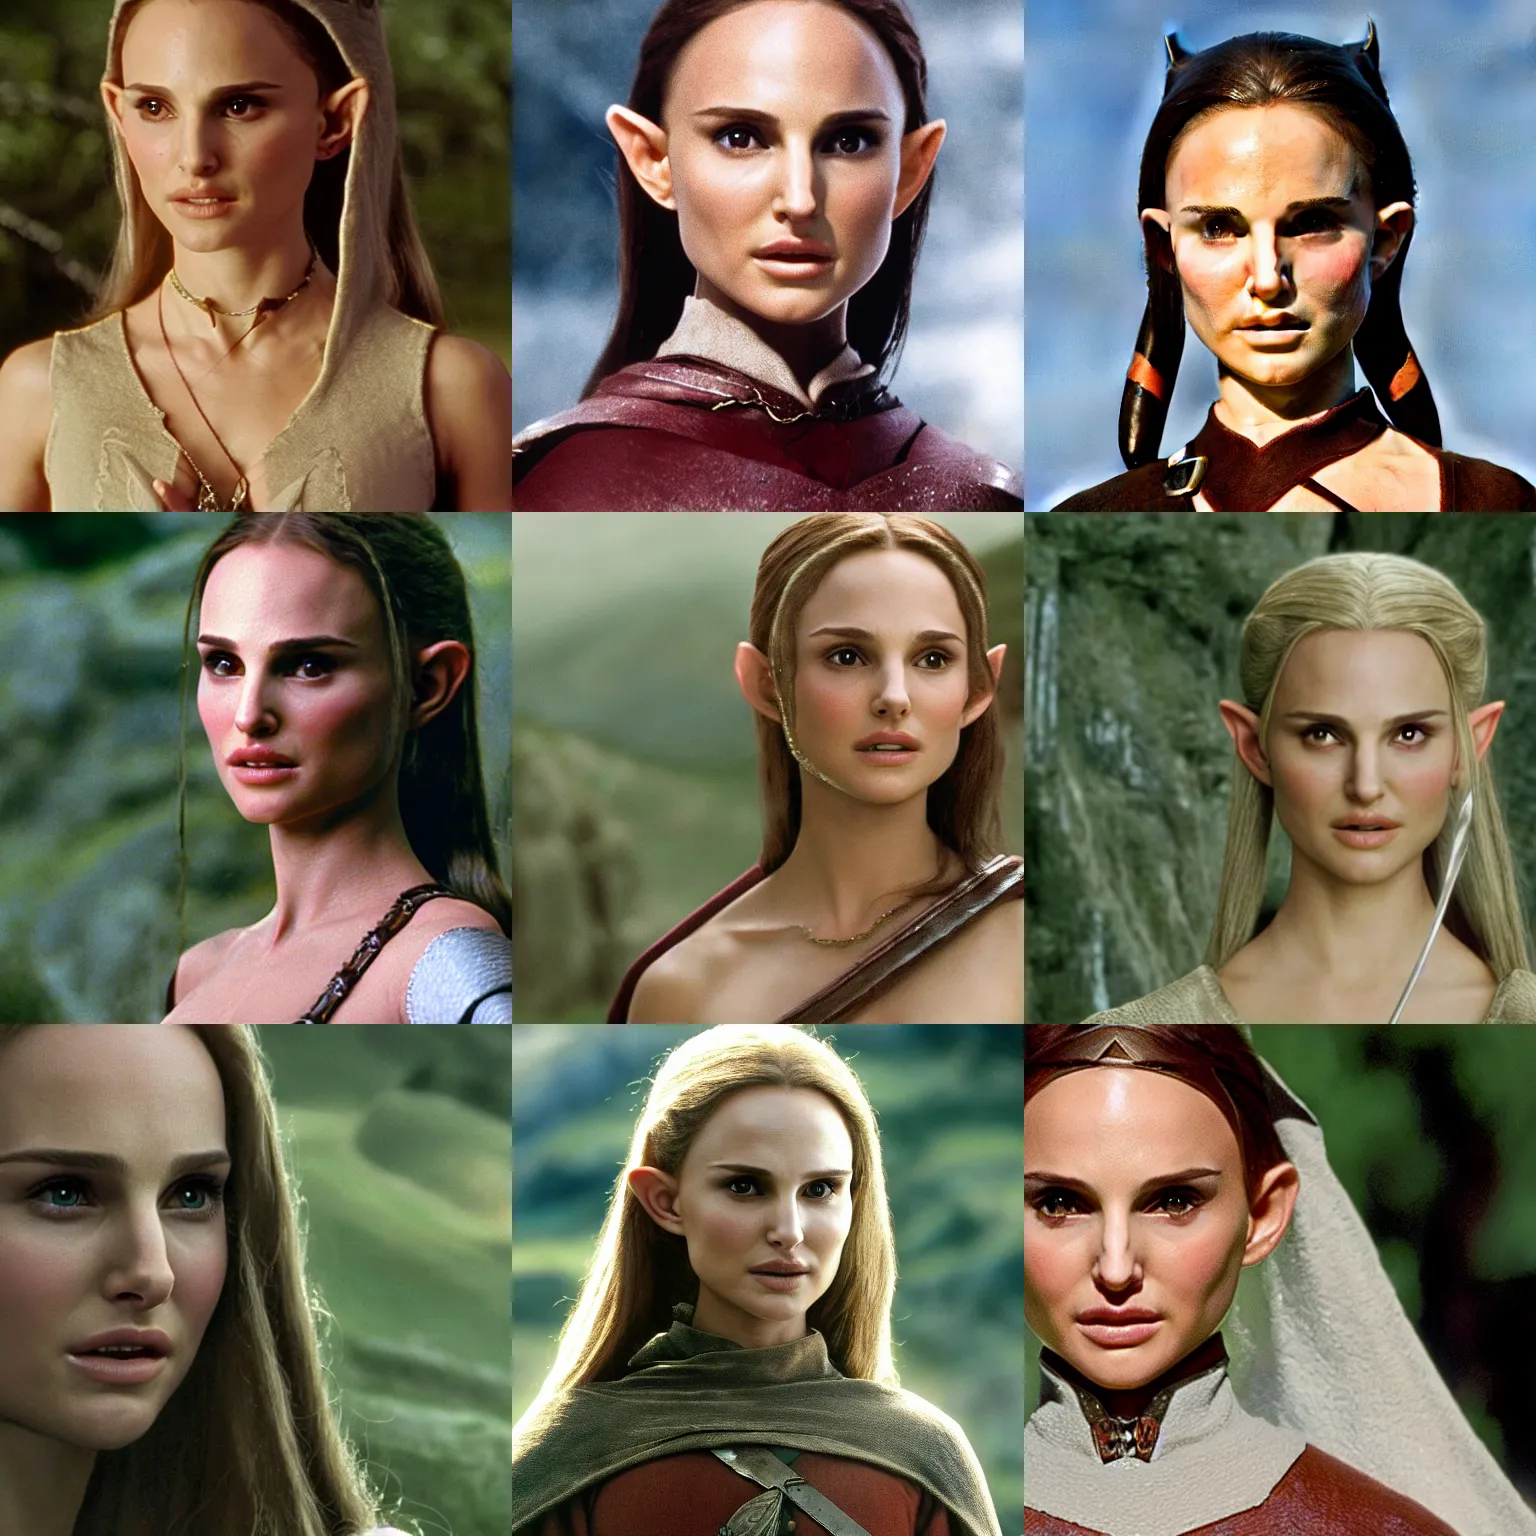 Prompt: high-resolution photo of elf Natalie Portman (youthful skin, symmetrical features, long pointed ears) in The Lord of the Rings, 8k